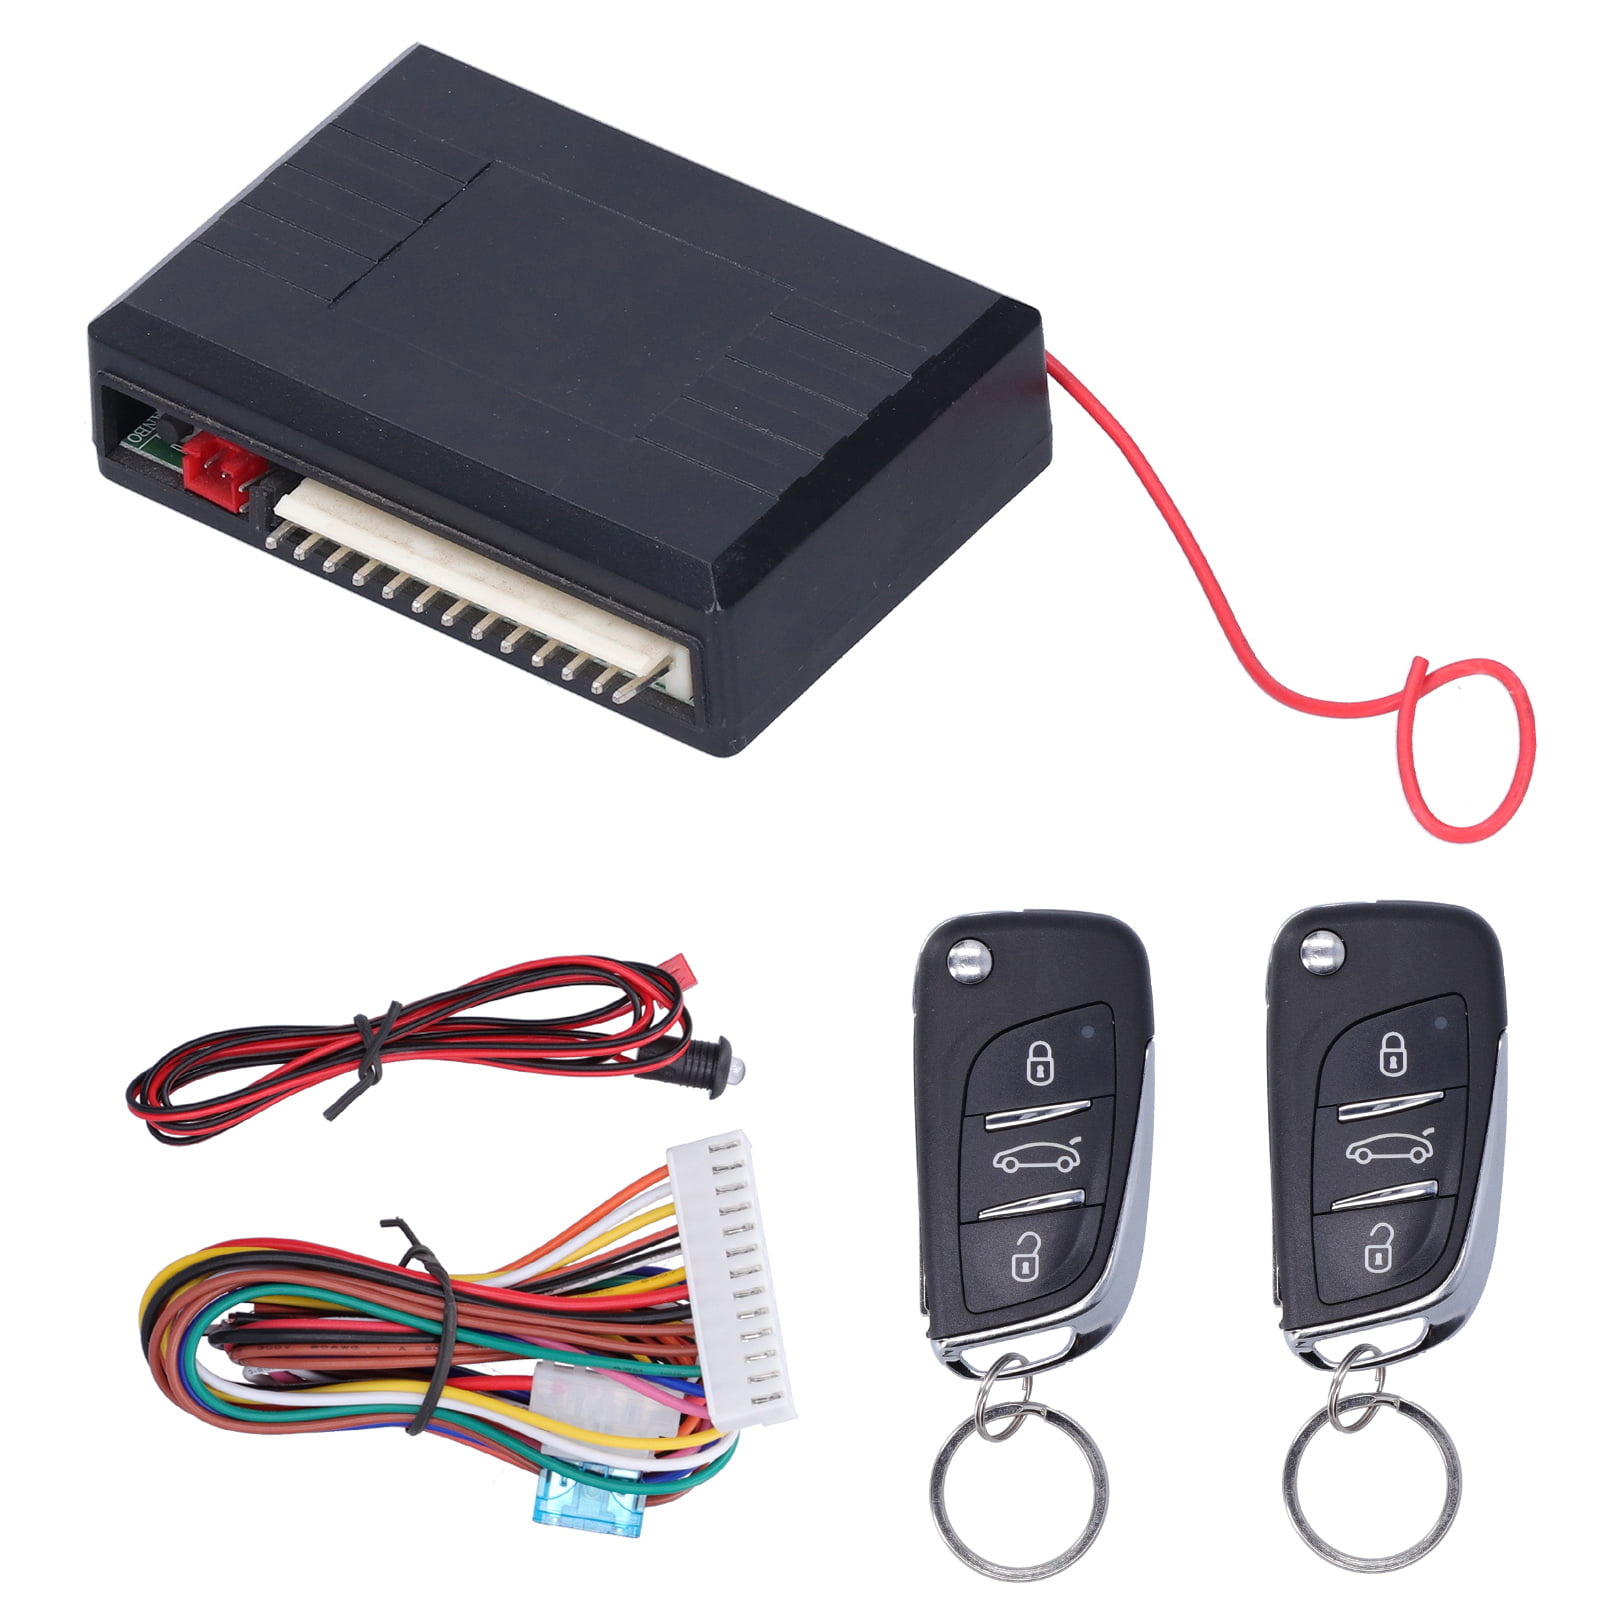 Central Kit Door Locking Vehicle Keyless Entry System W/ 2Pcs Remote Controllers 